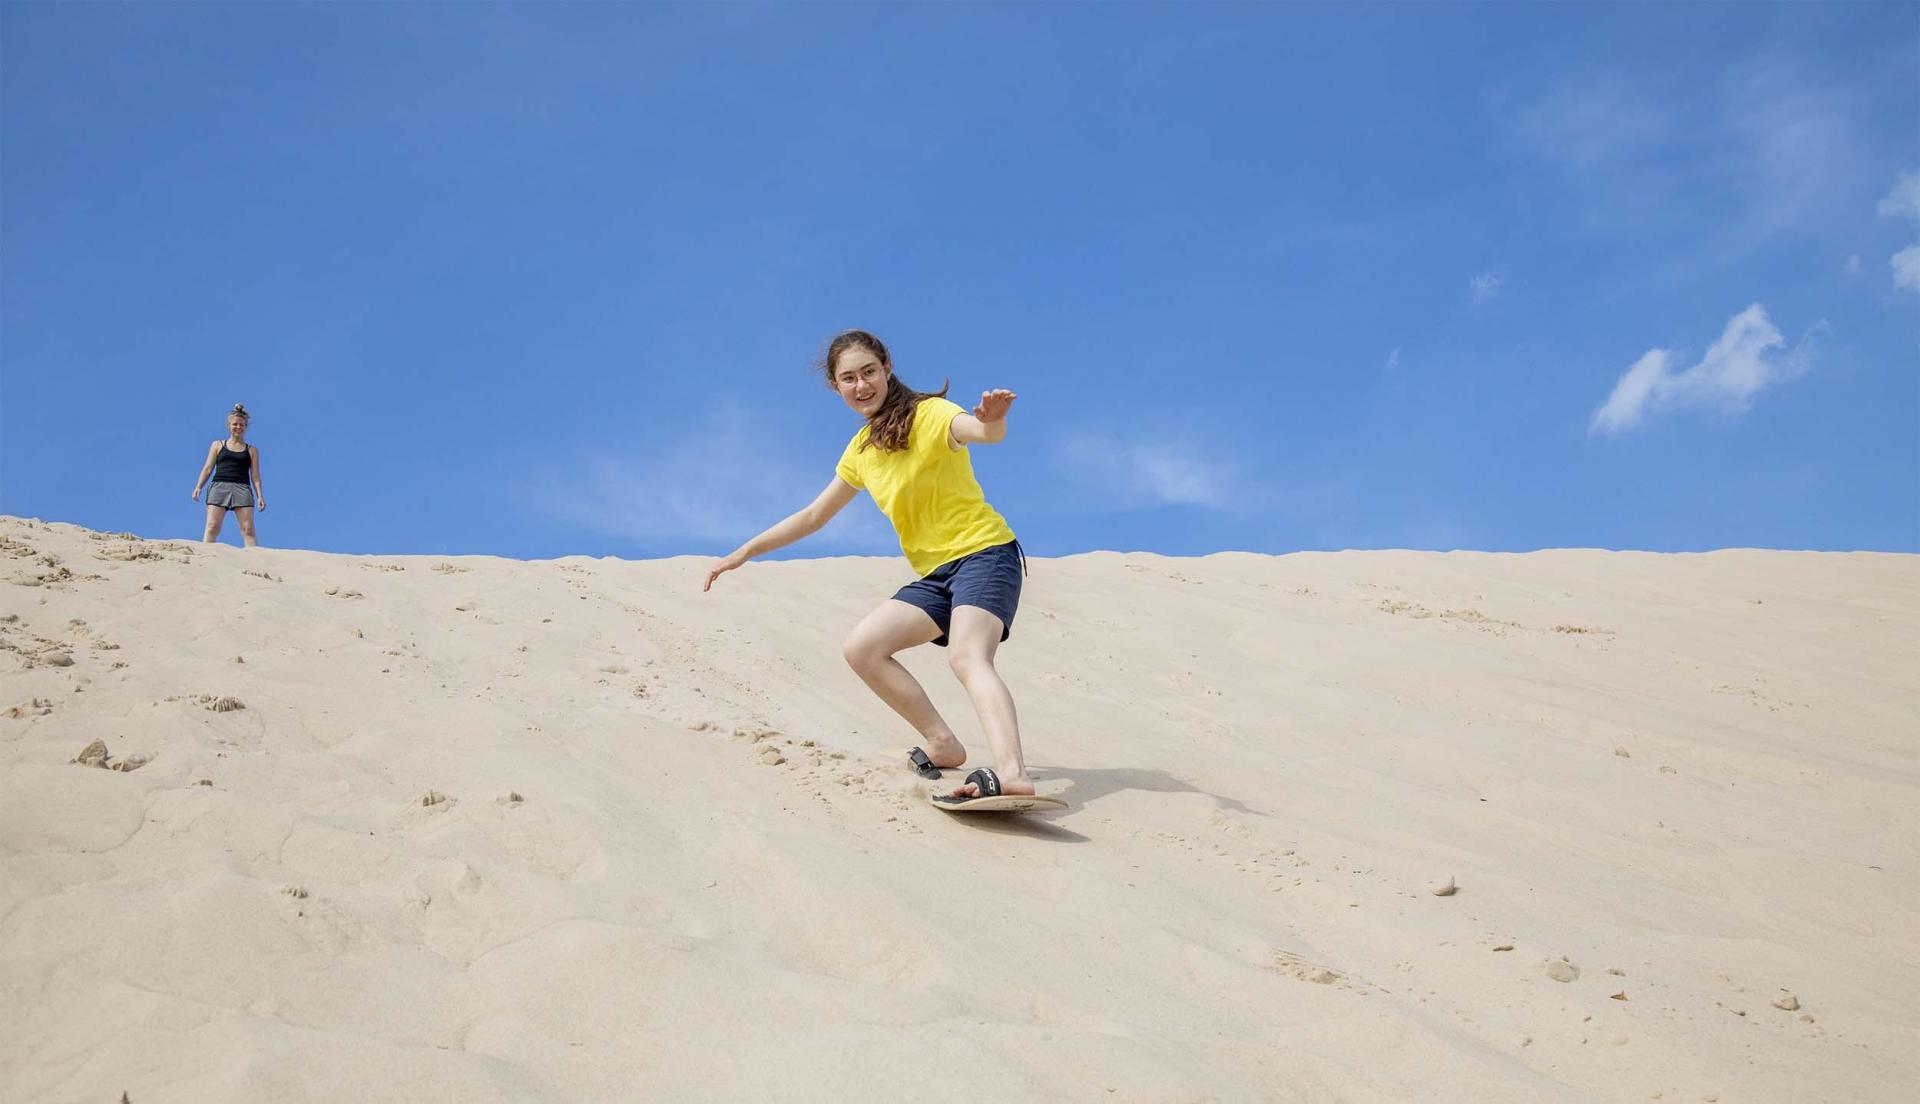 A person sand boarding at Warren Dunes State Park in the summer.